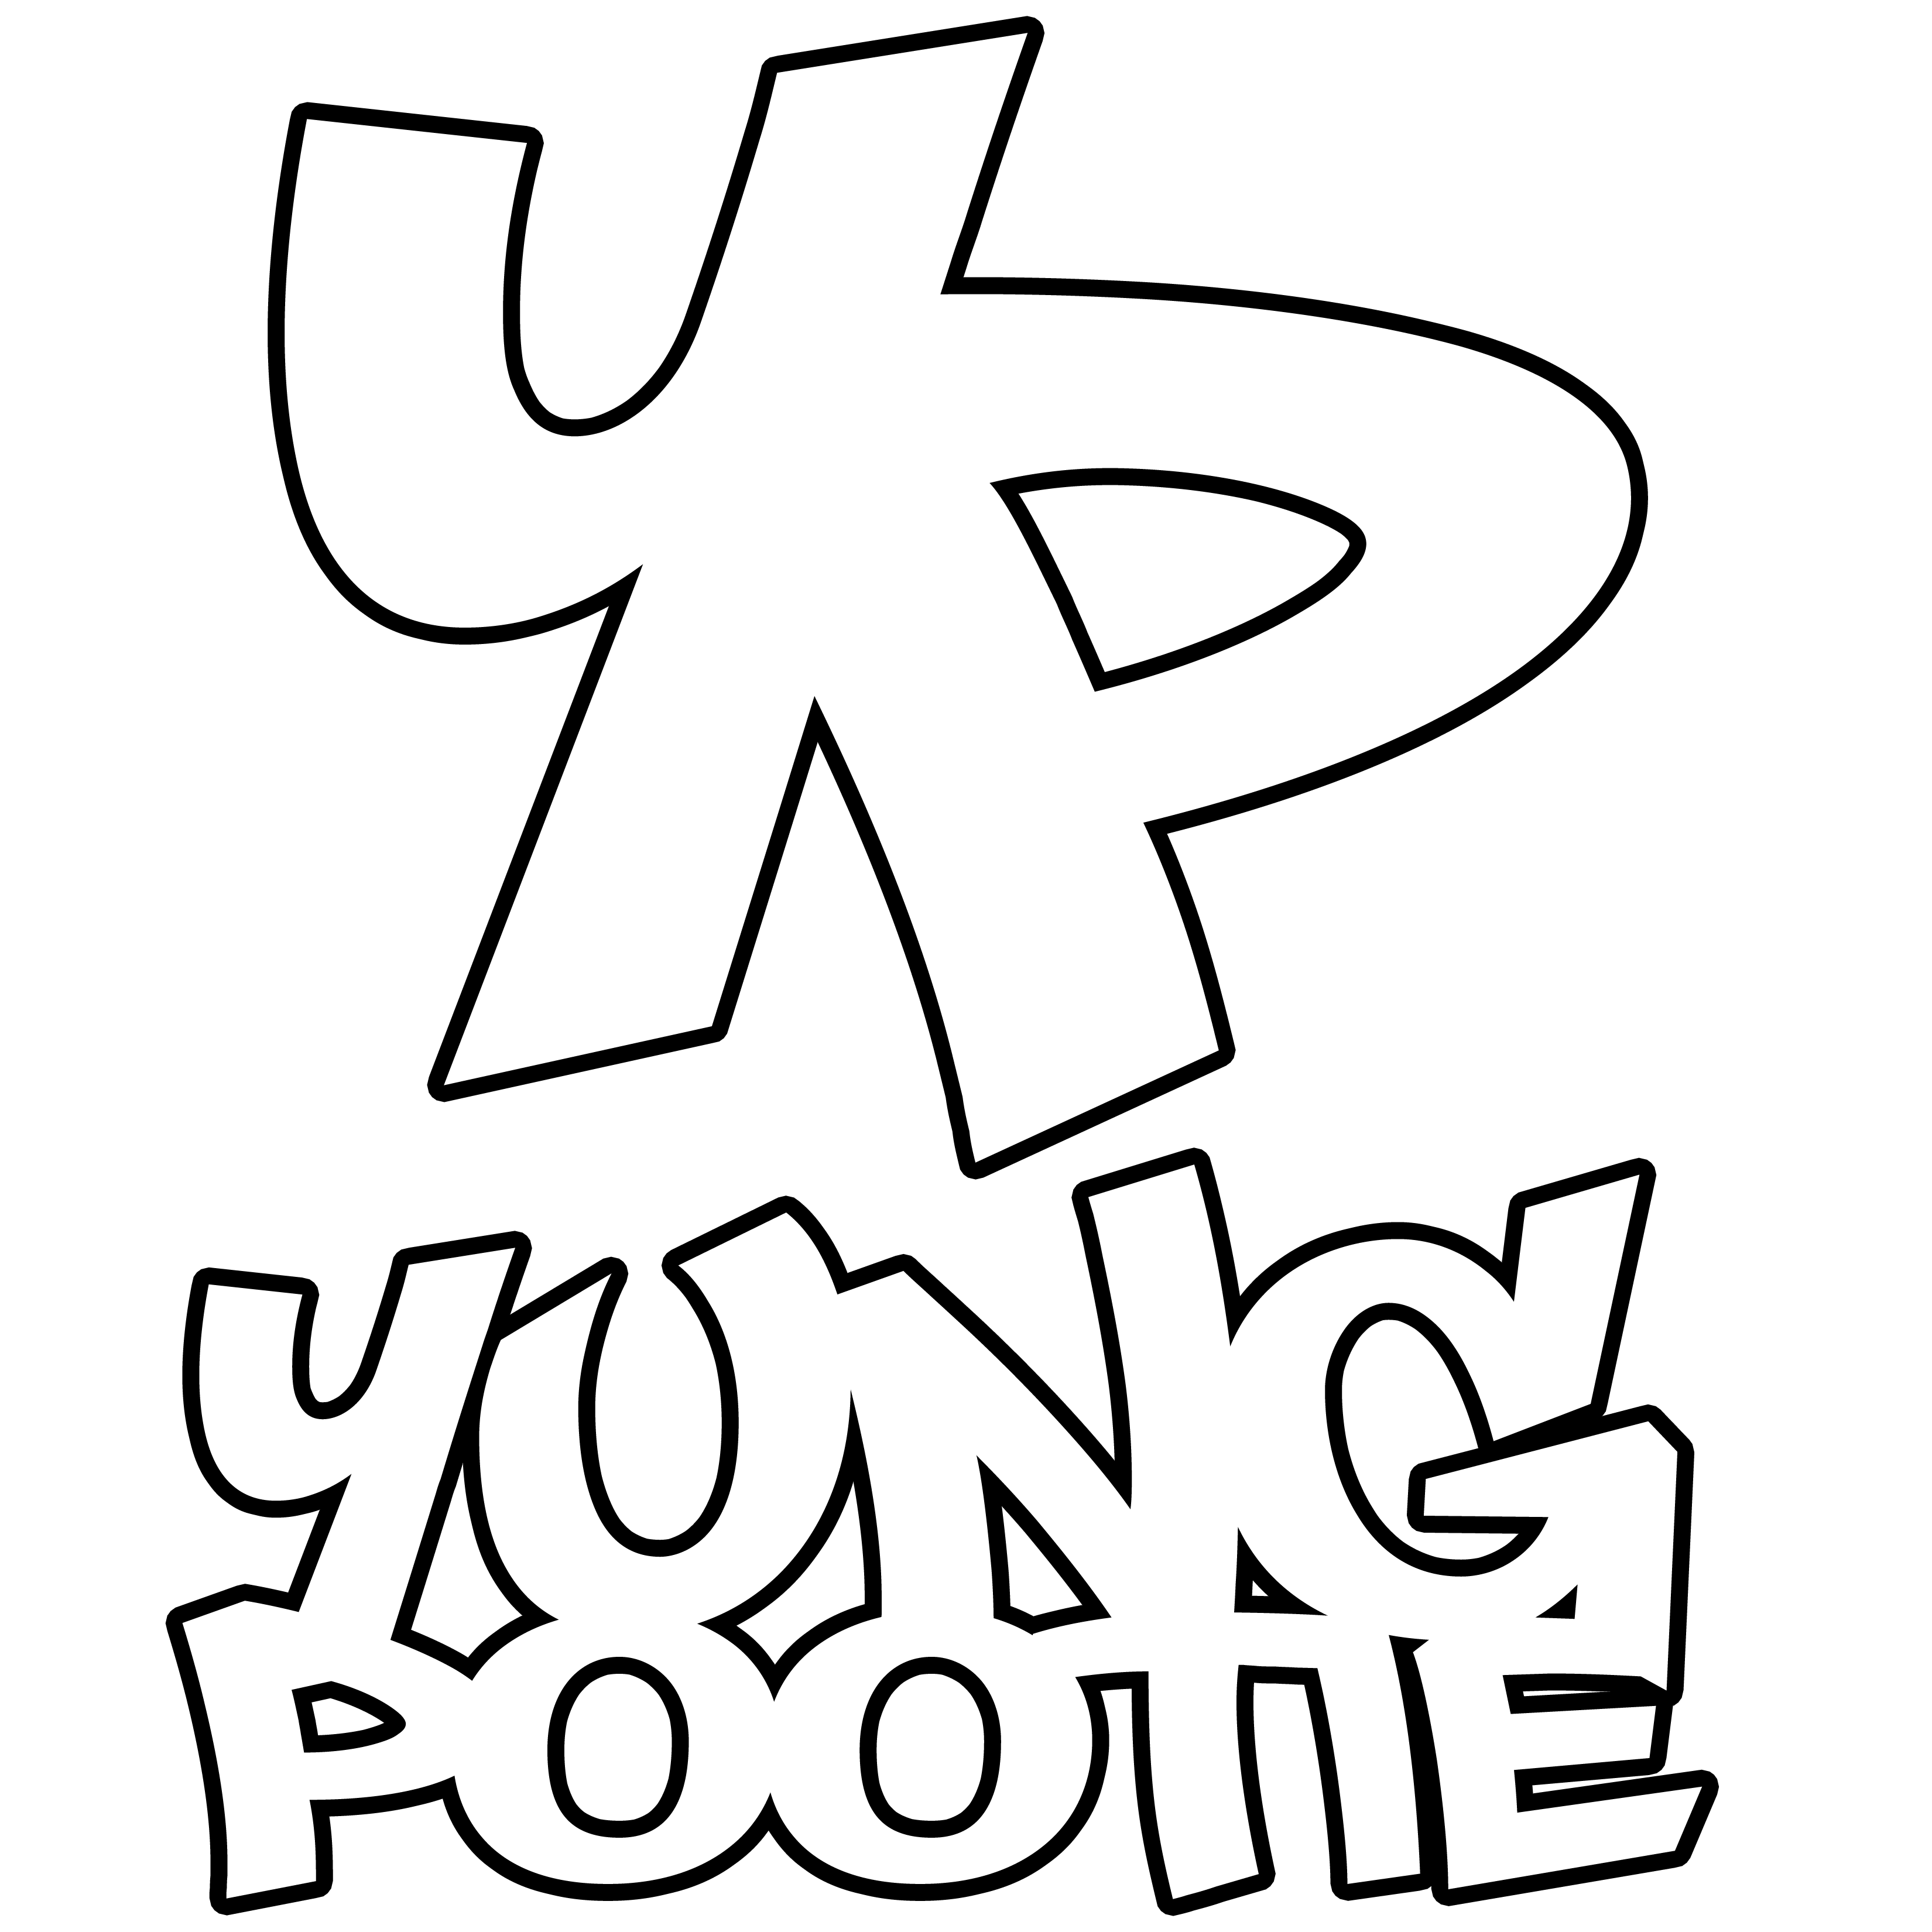 YUNG POOTIE